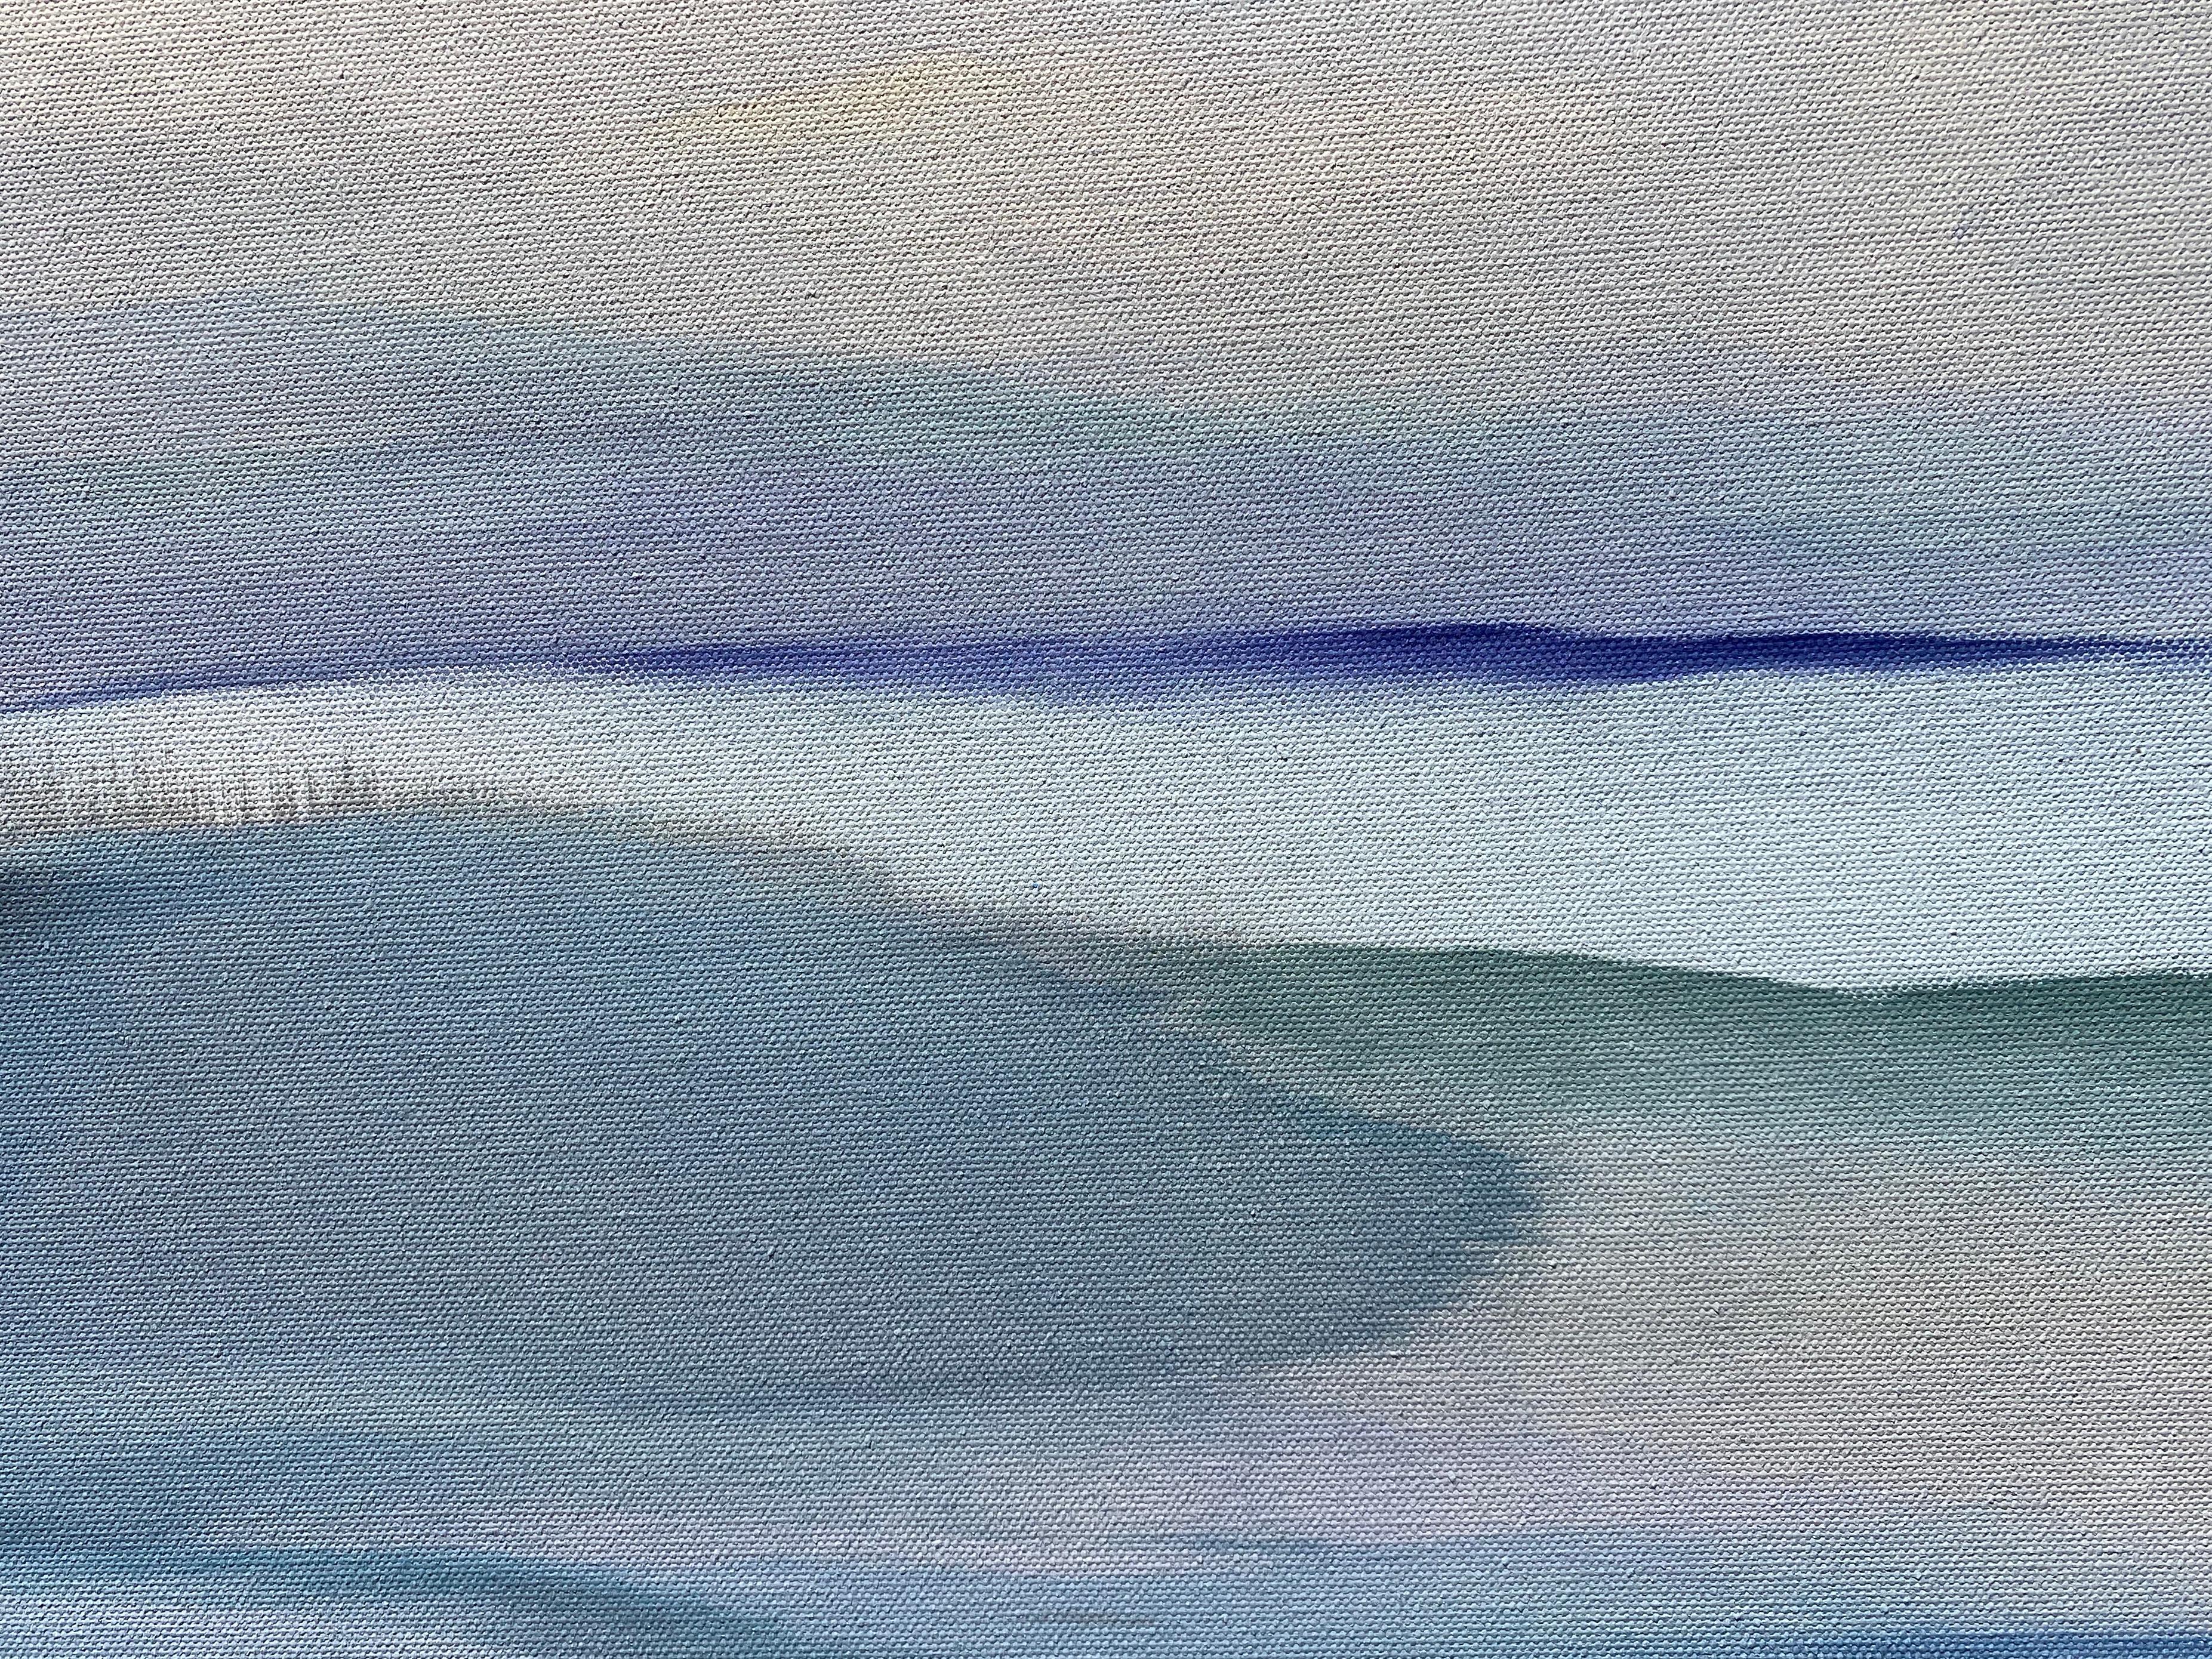 <p>Artist Comments<br />An abstract landscape hinting at a cool, foggy morning along the bay in northern California. Opaque layers of blues, green and purple wash across the canvas to set the mood. Artist Alicia Dunn says her focus was on using